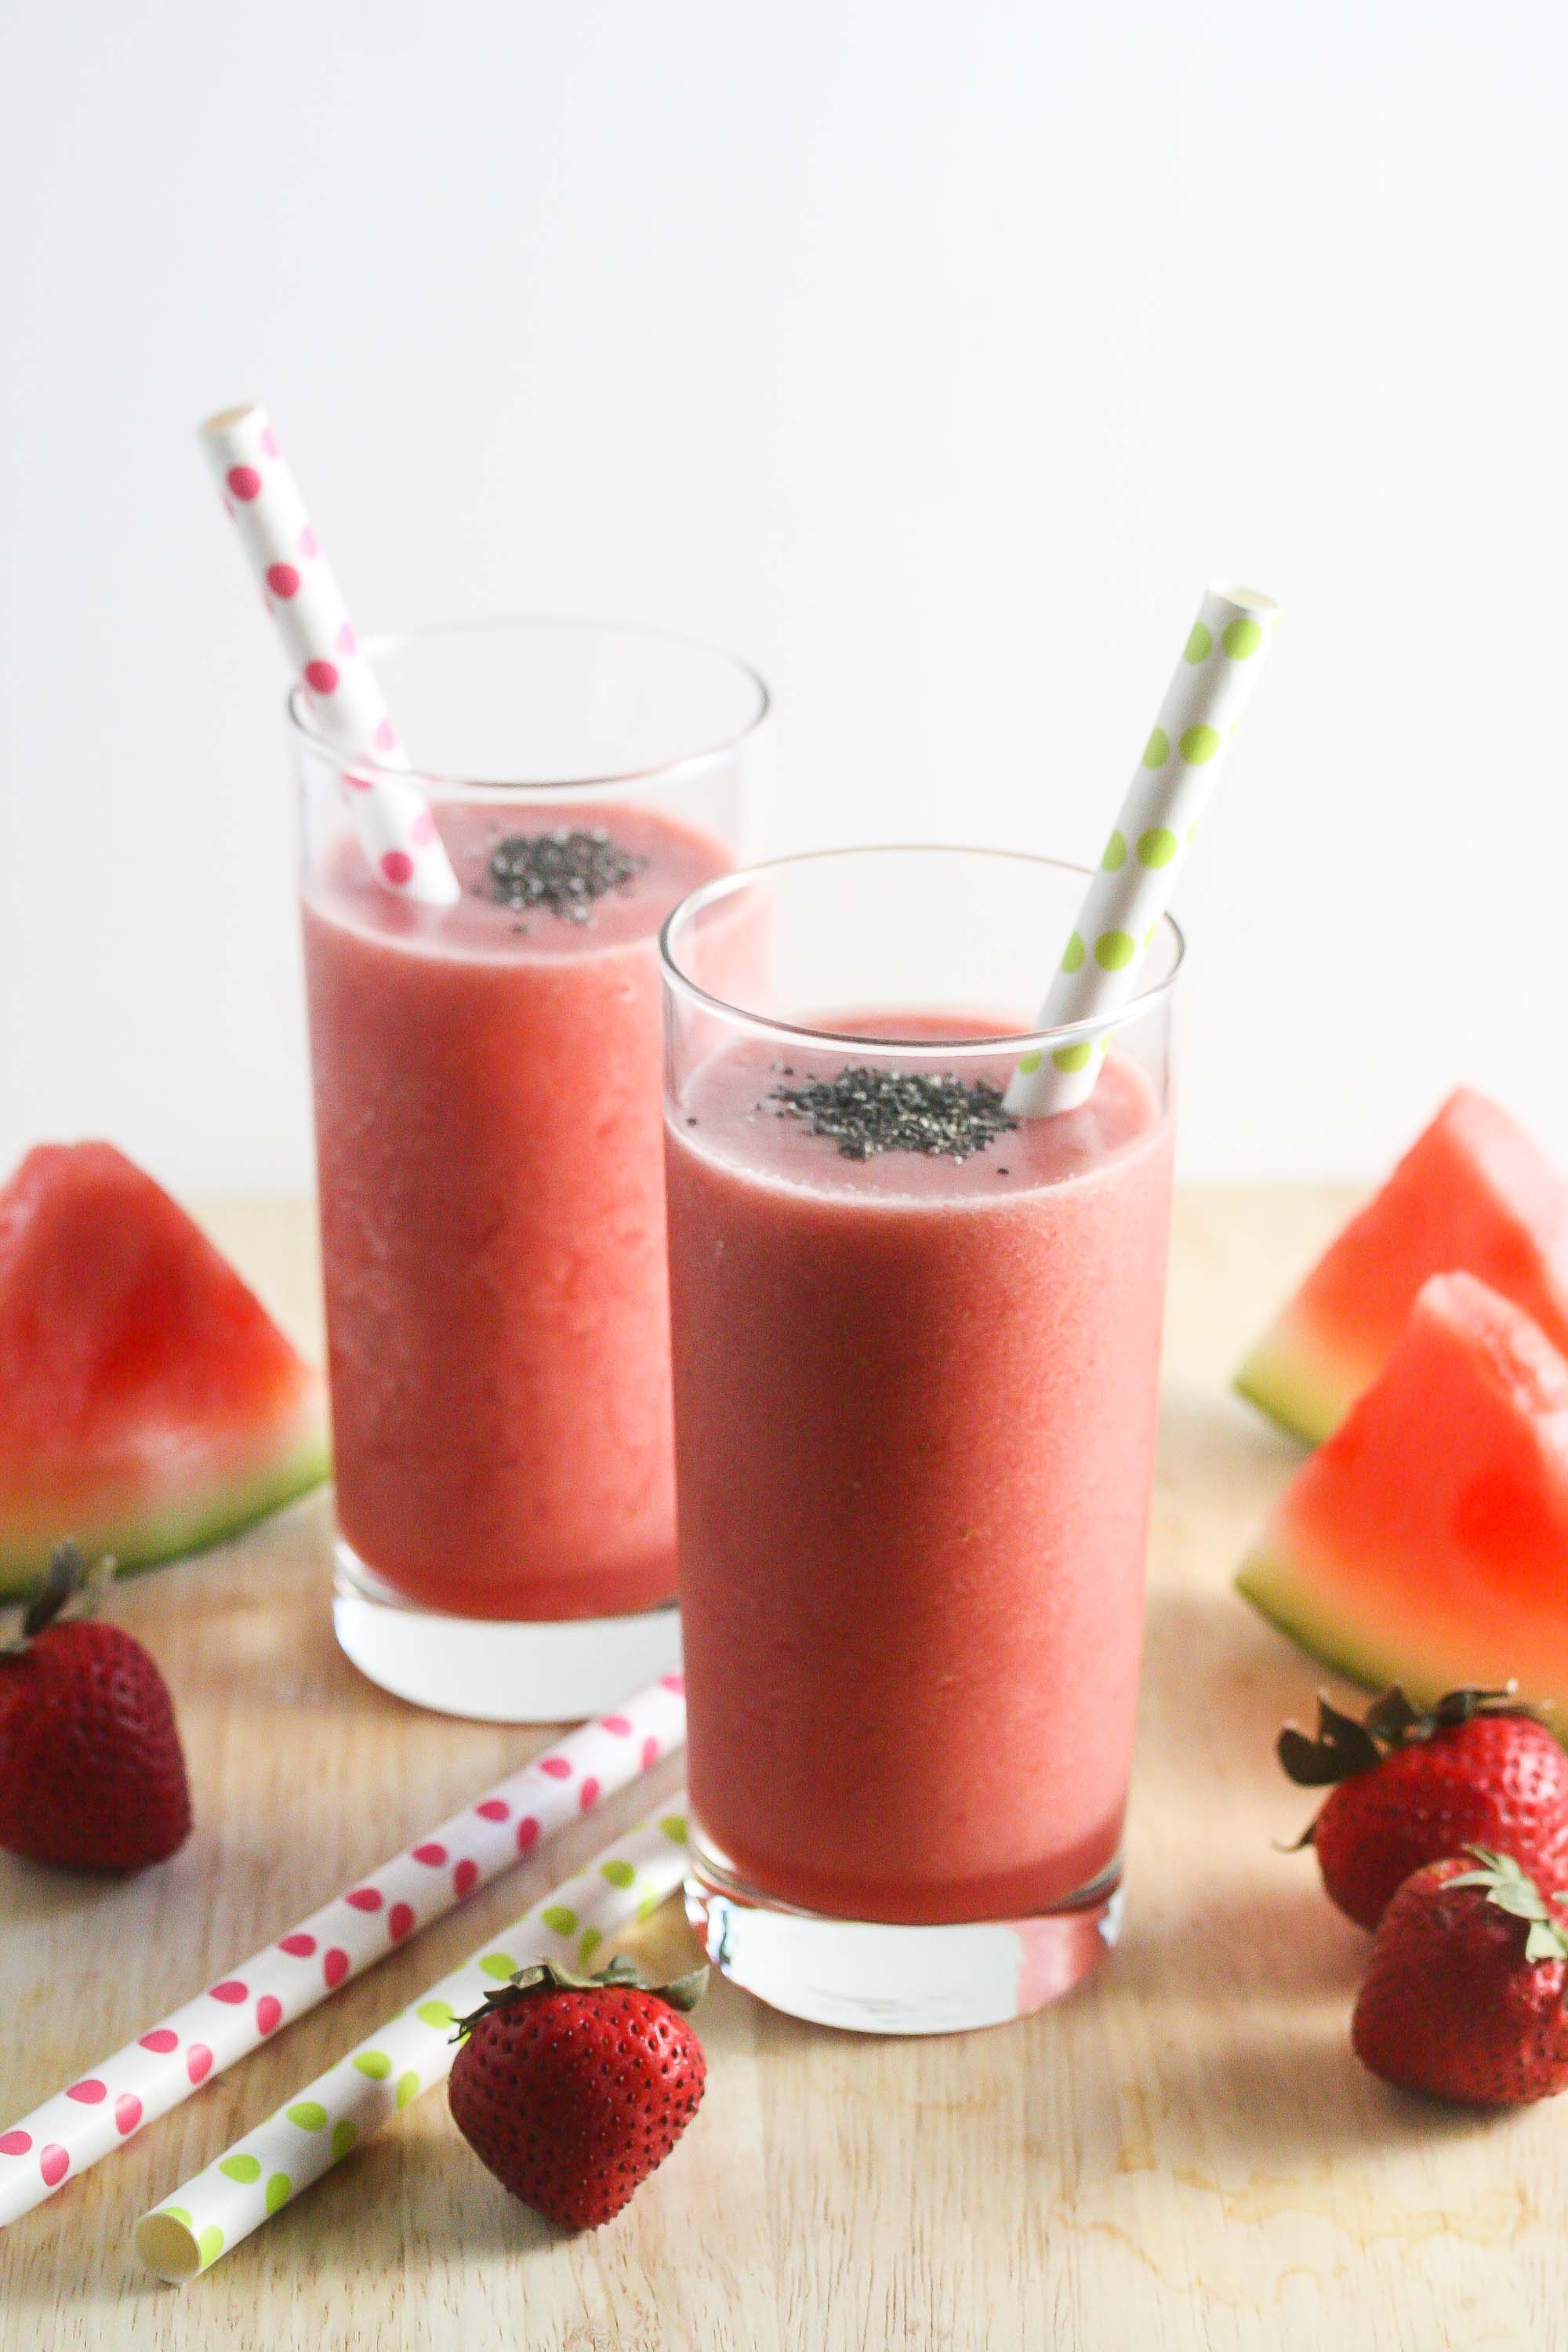 Strawberry Watermelon Smoothie, made with only 3 wholesome ingredients! www.laurenkellynutrition.com